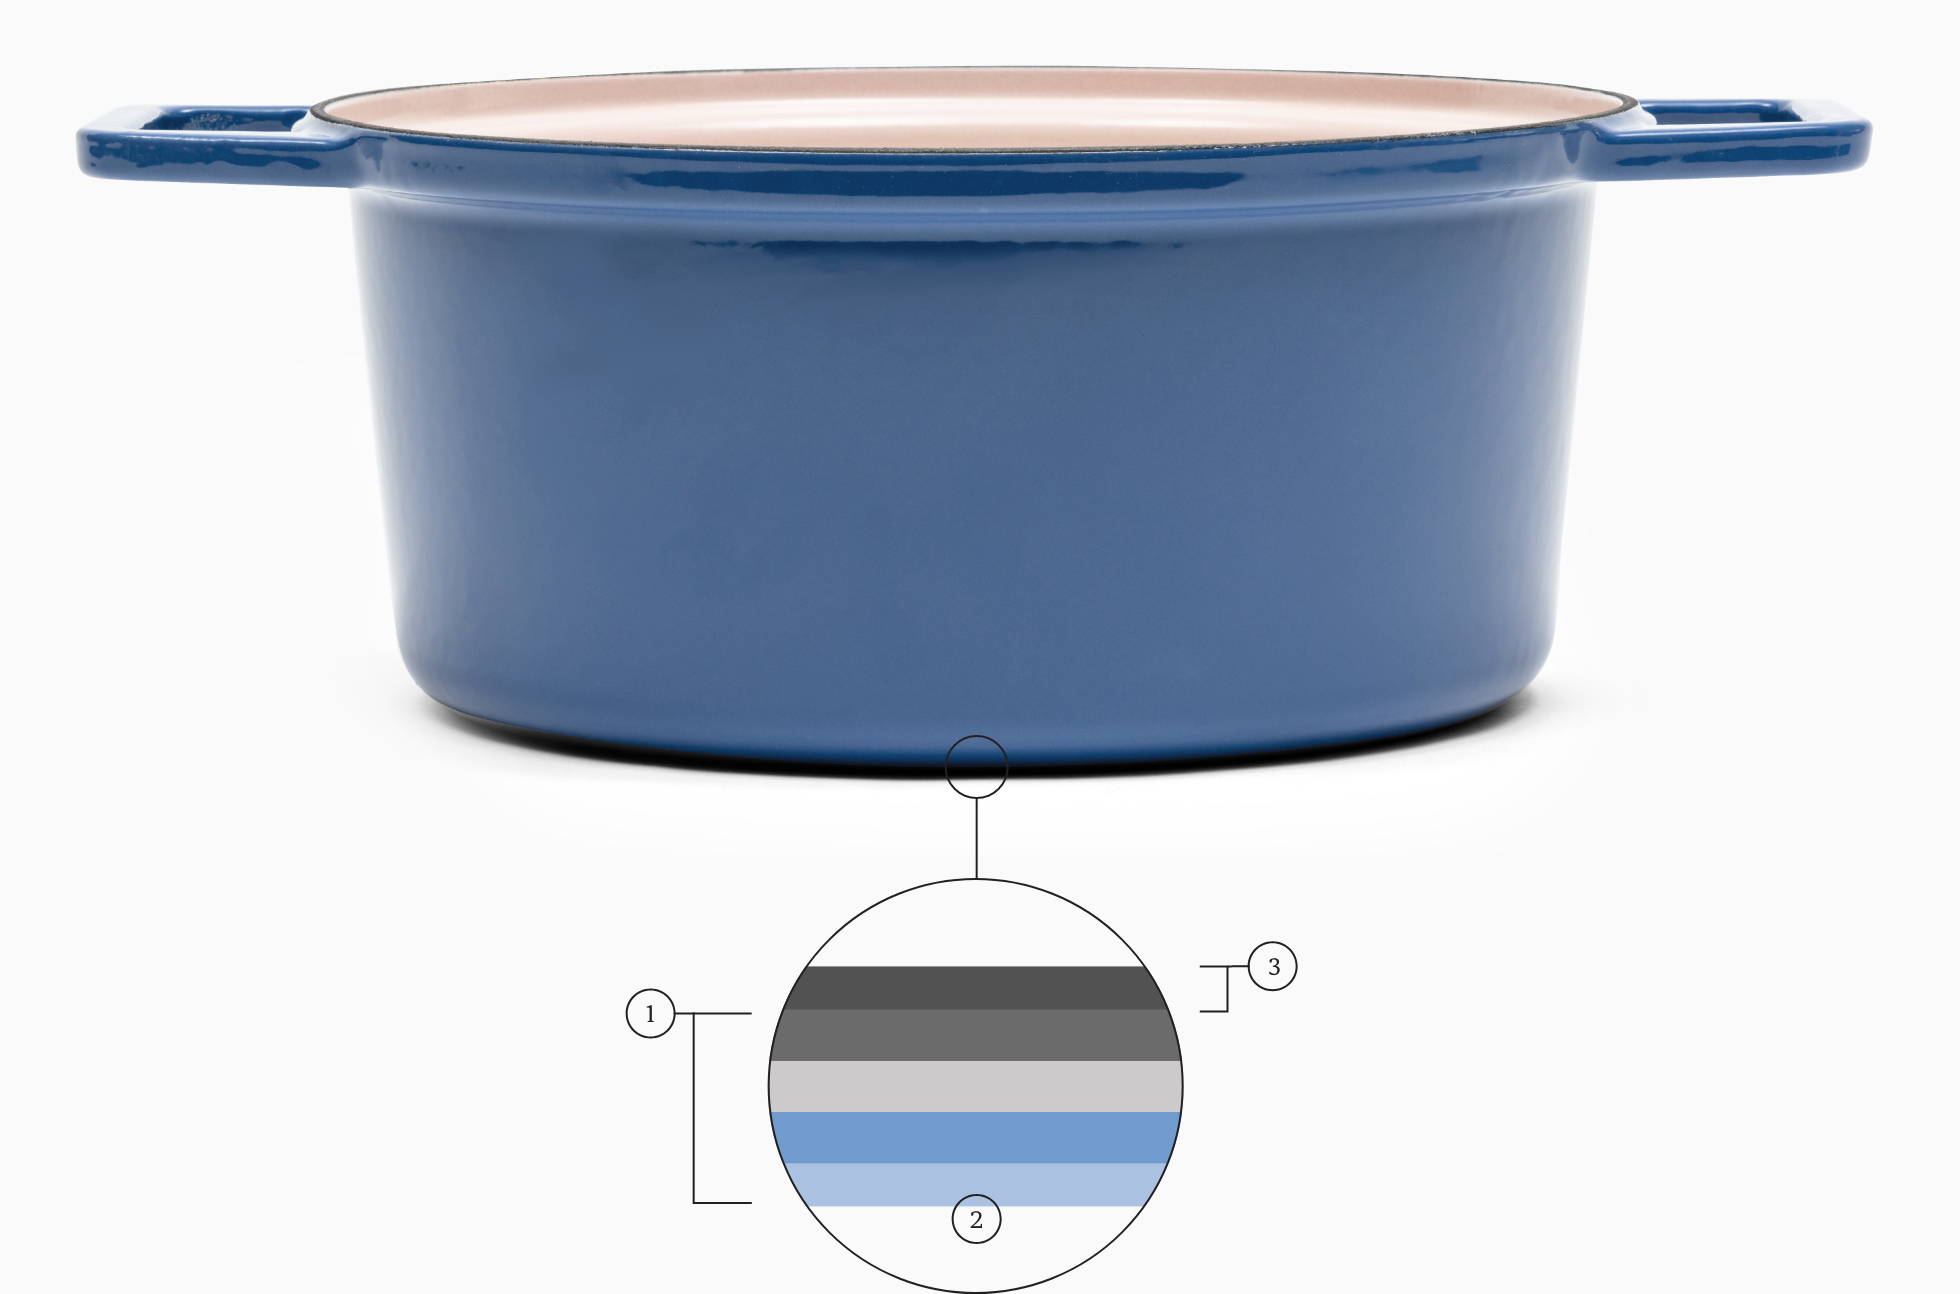 Blue Misen Dutch Oven with illustrated cross-section callout showing four separate enamel layers on cast iron base.